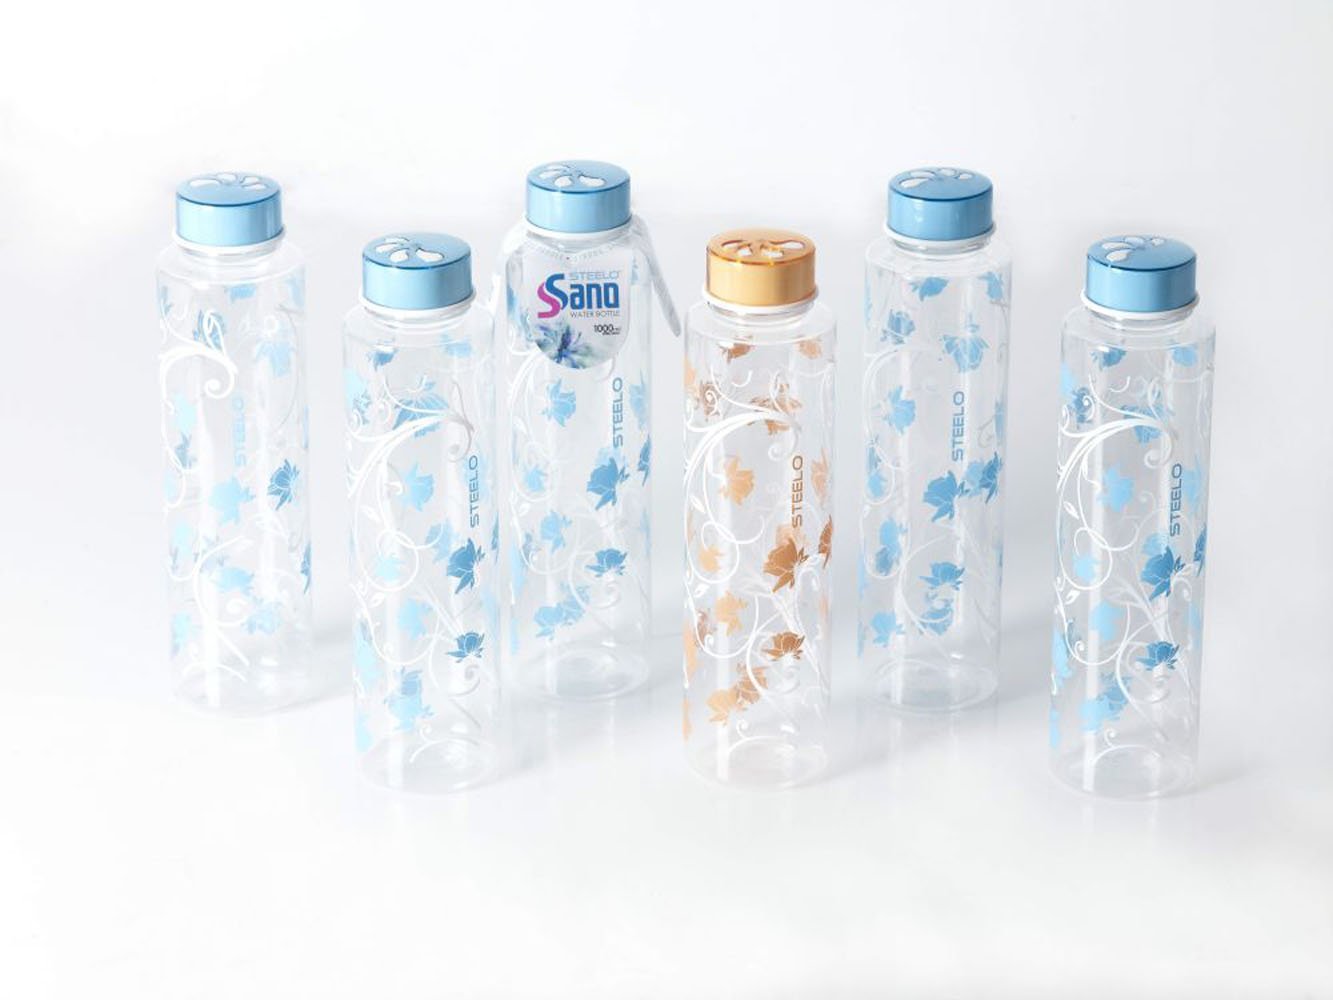 Amazon: Buy Steelo Sano Printed Bottle Set, 1 Litre, Set of 6 at Rs 256 only